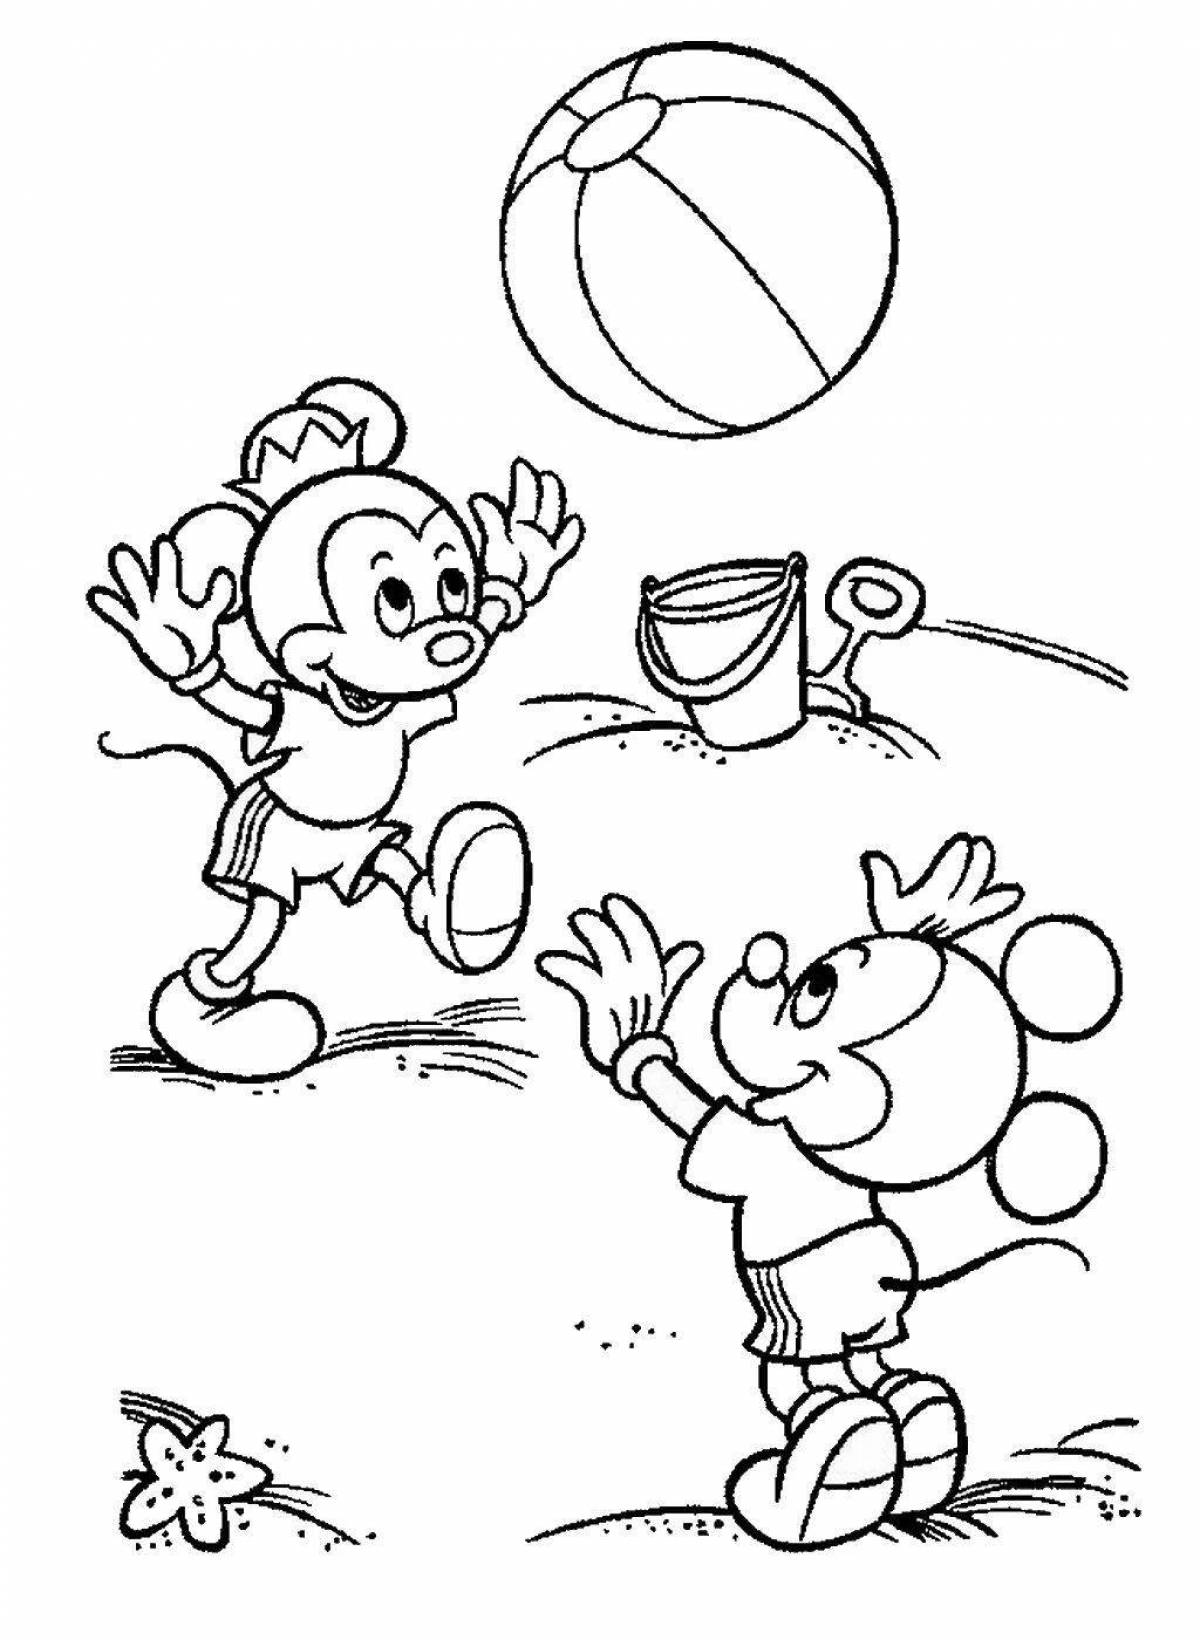 A fun coloring book about a healthy lifestyle for kids